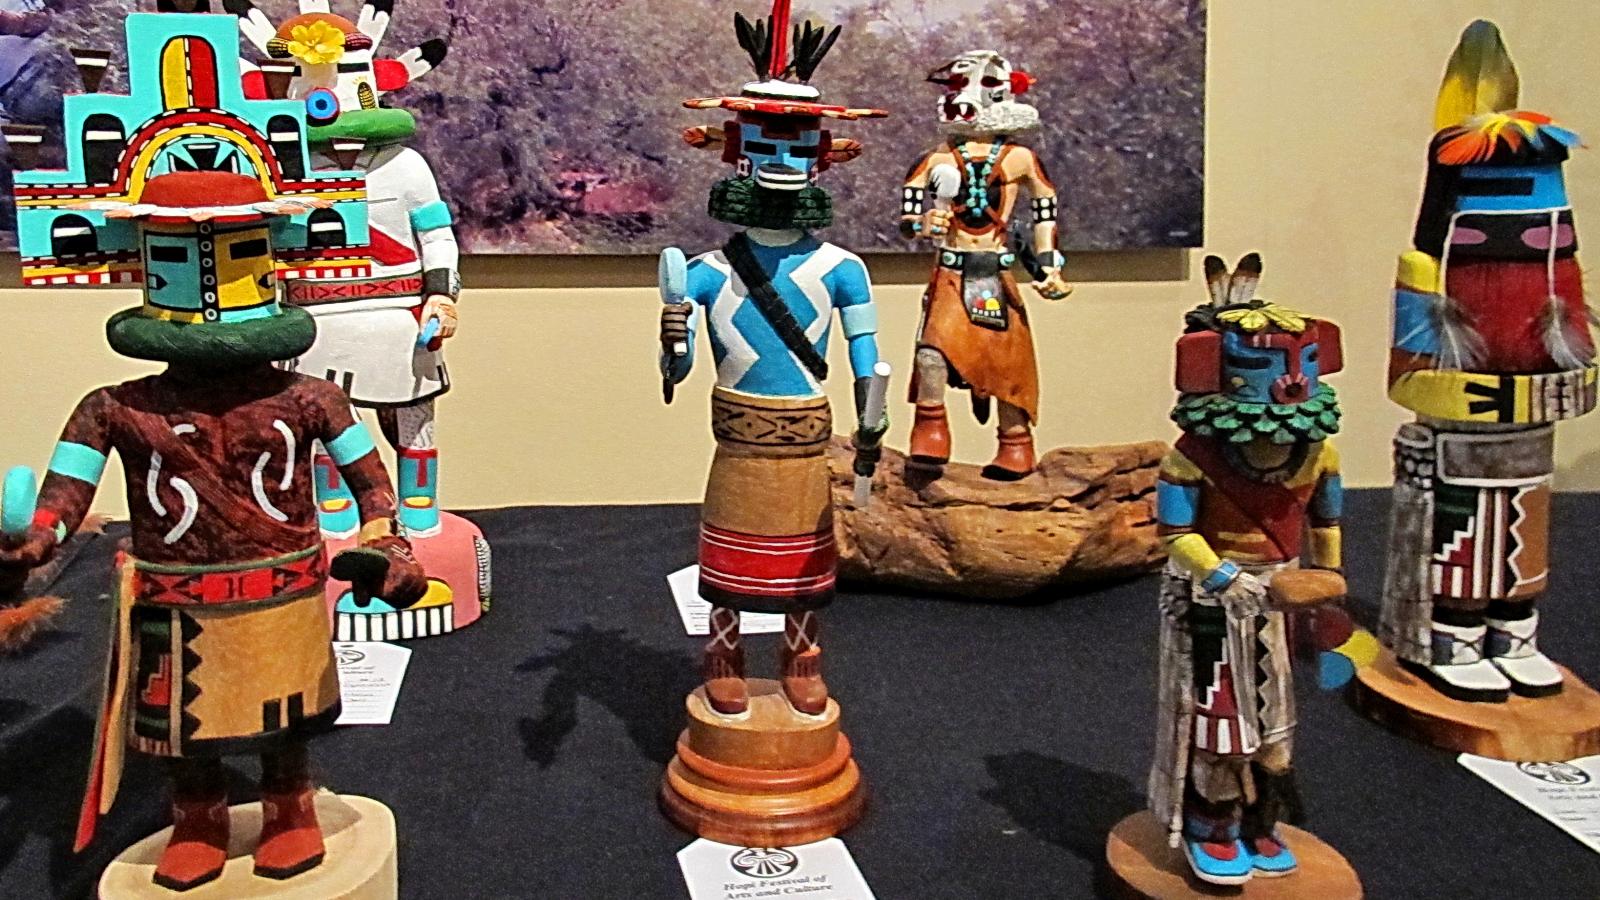 A display of colorful carved katsina dolls made by Hopi artists